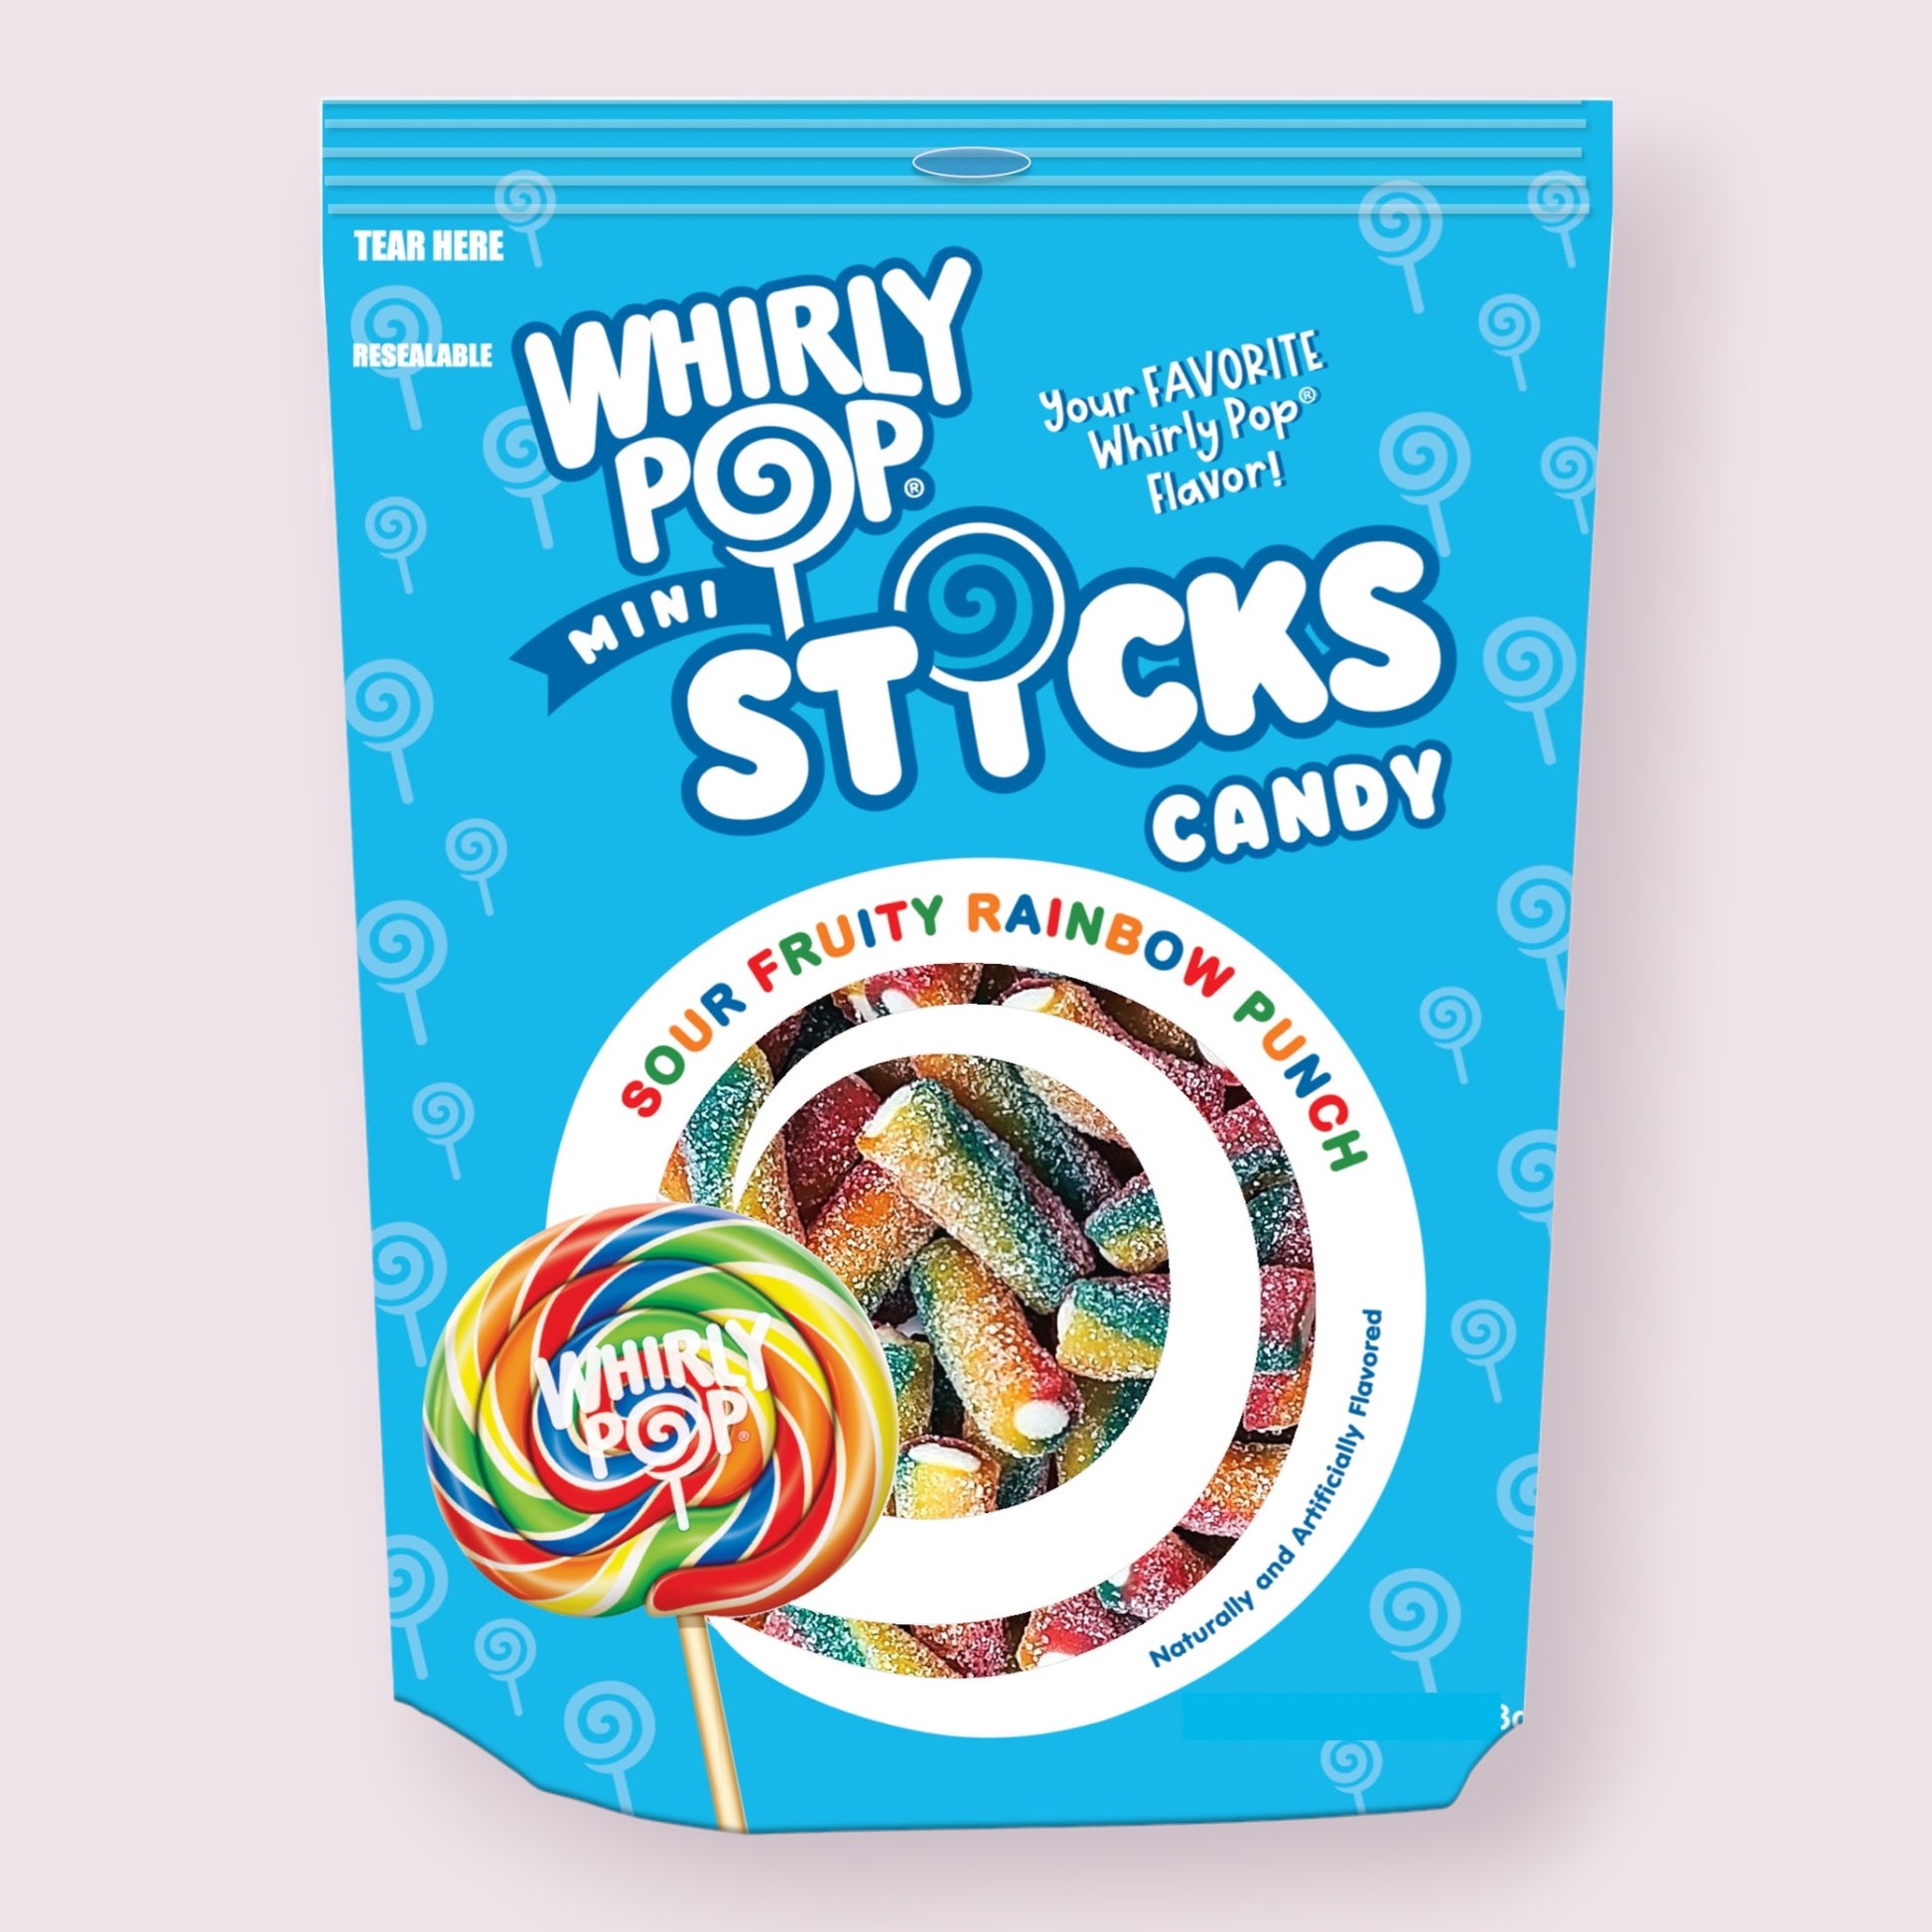 Whirly Pop Mini Sticks Chewy Candy Bag  Pixie Candy Shoppe   